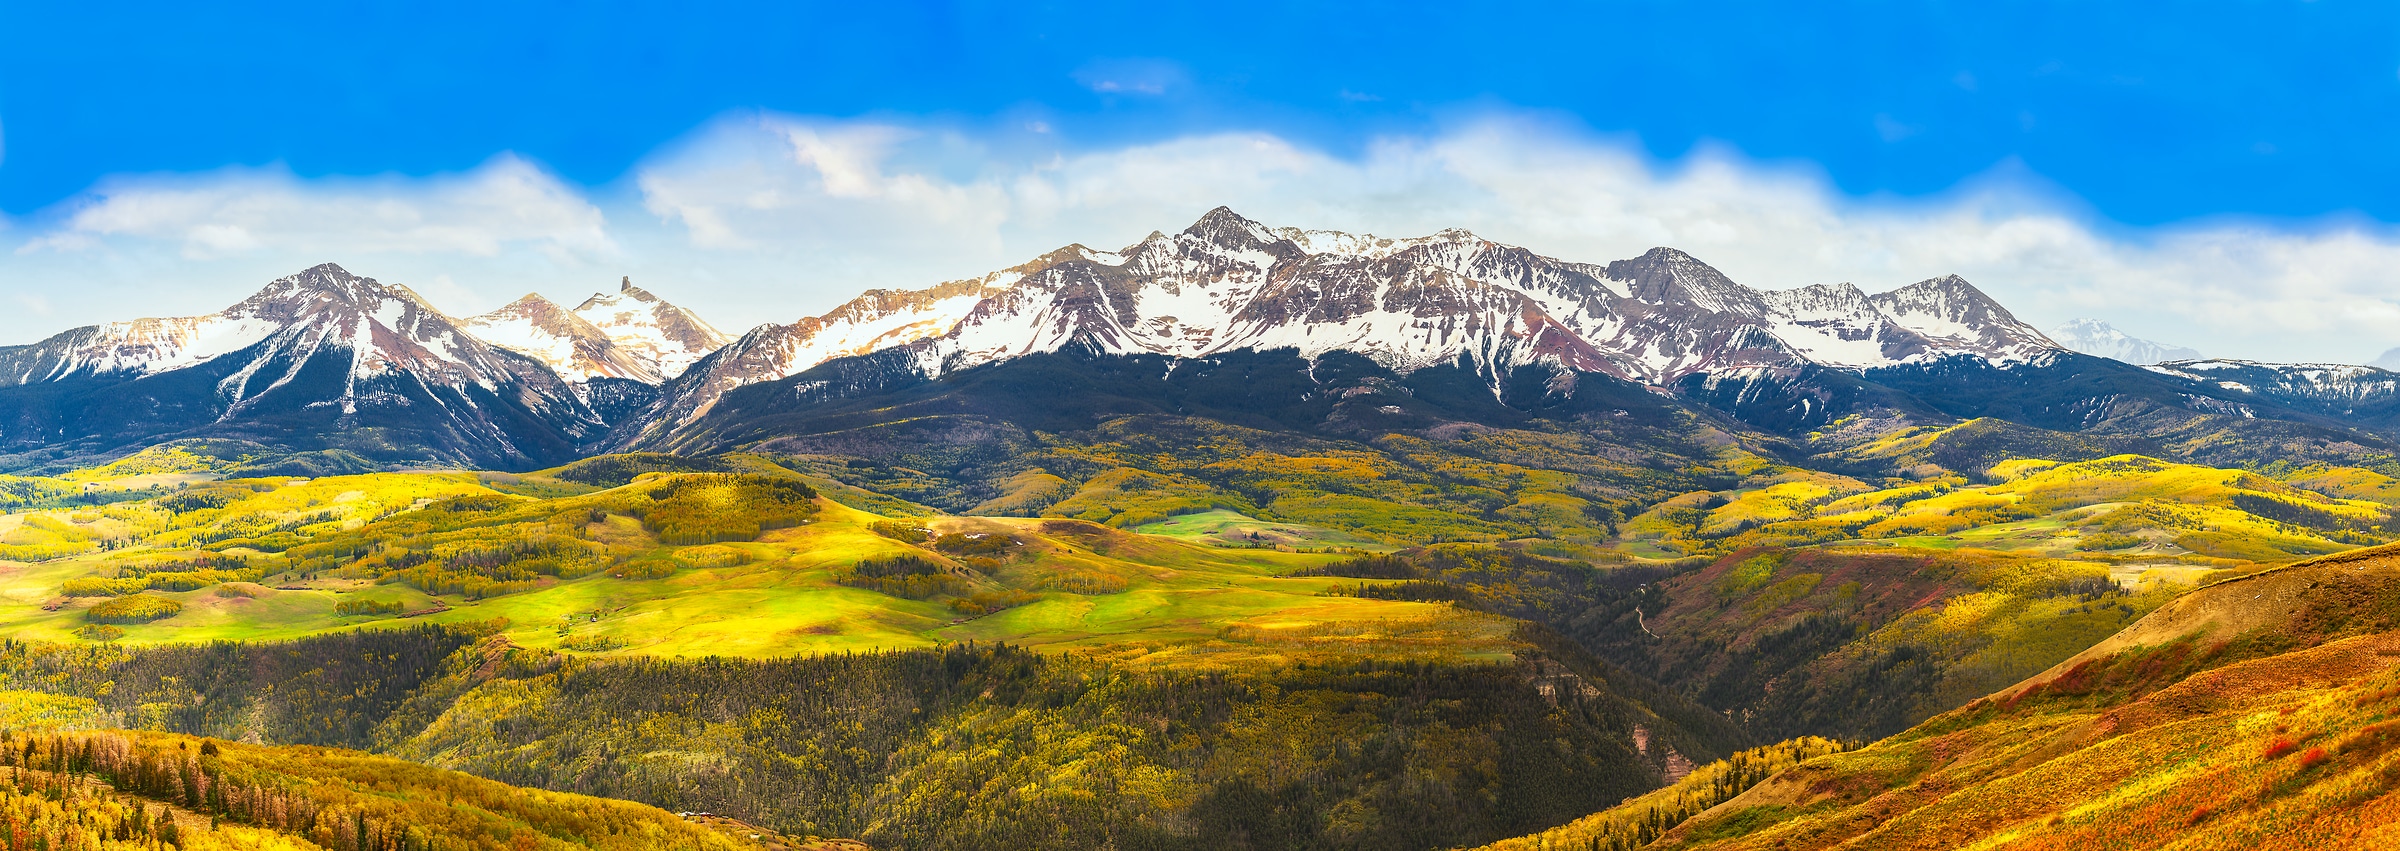 276 megapixels! A very high resolution, large-format VAST photo print of a mountain landscape; photograph created by David David in Wilson Peak, Lizard Head Wilderness, Uncompahgre National Forest, San Juan Mountains, Colorado.